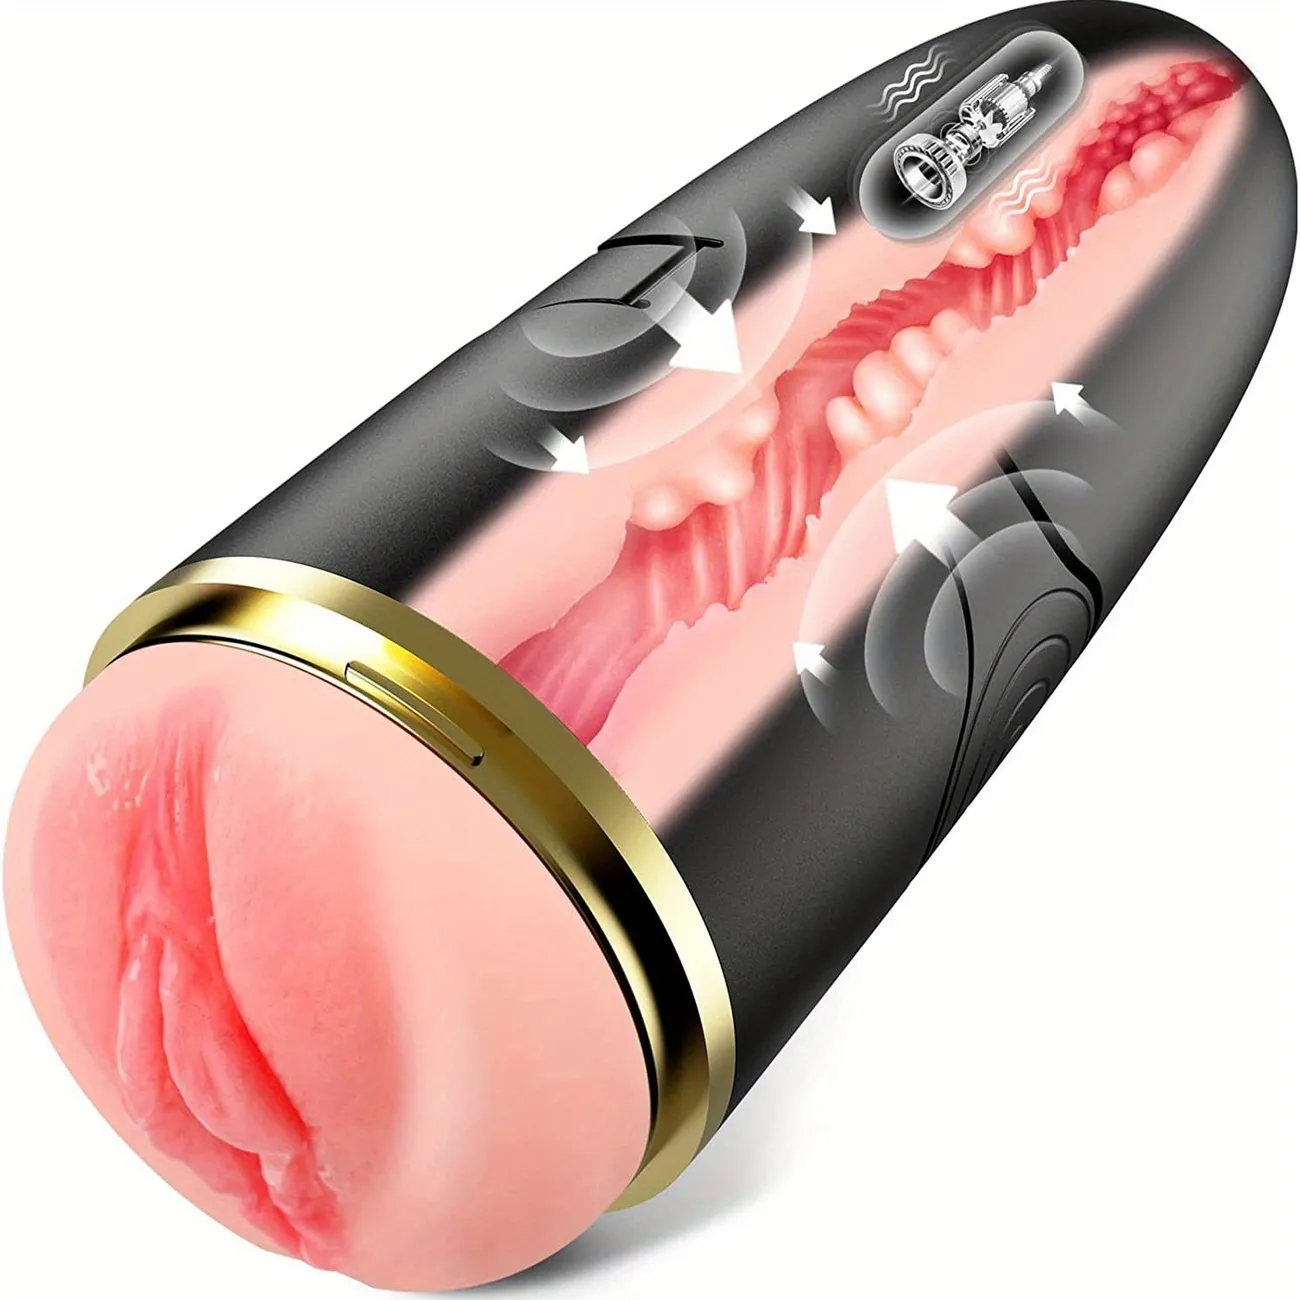 Automatic Male Masturbator With 10 Vibrations For Penis Stimulation, Electric Pocket Pussy For Male Stroker, Realistic Textured 3d Vagina, Man Masturbation Sex Toy For Men Male Adult Sex Toys